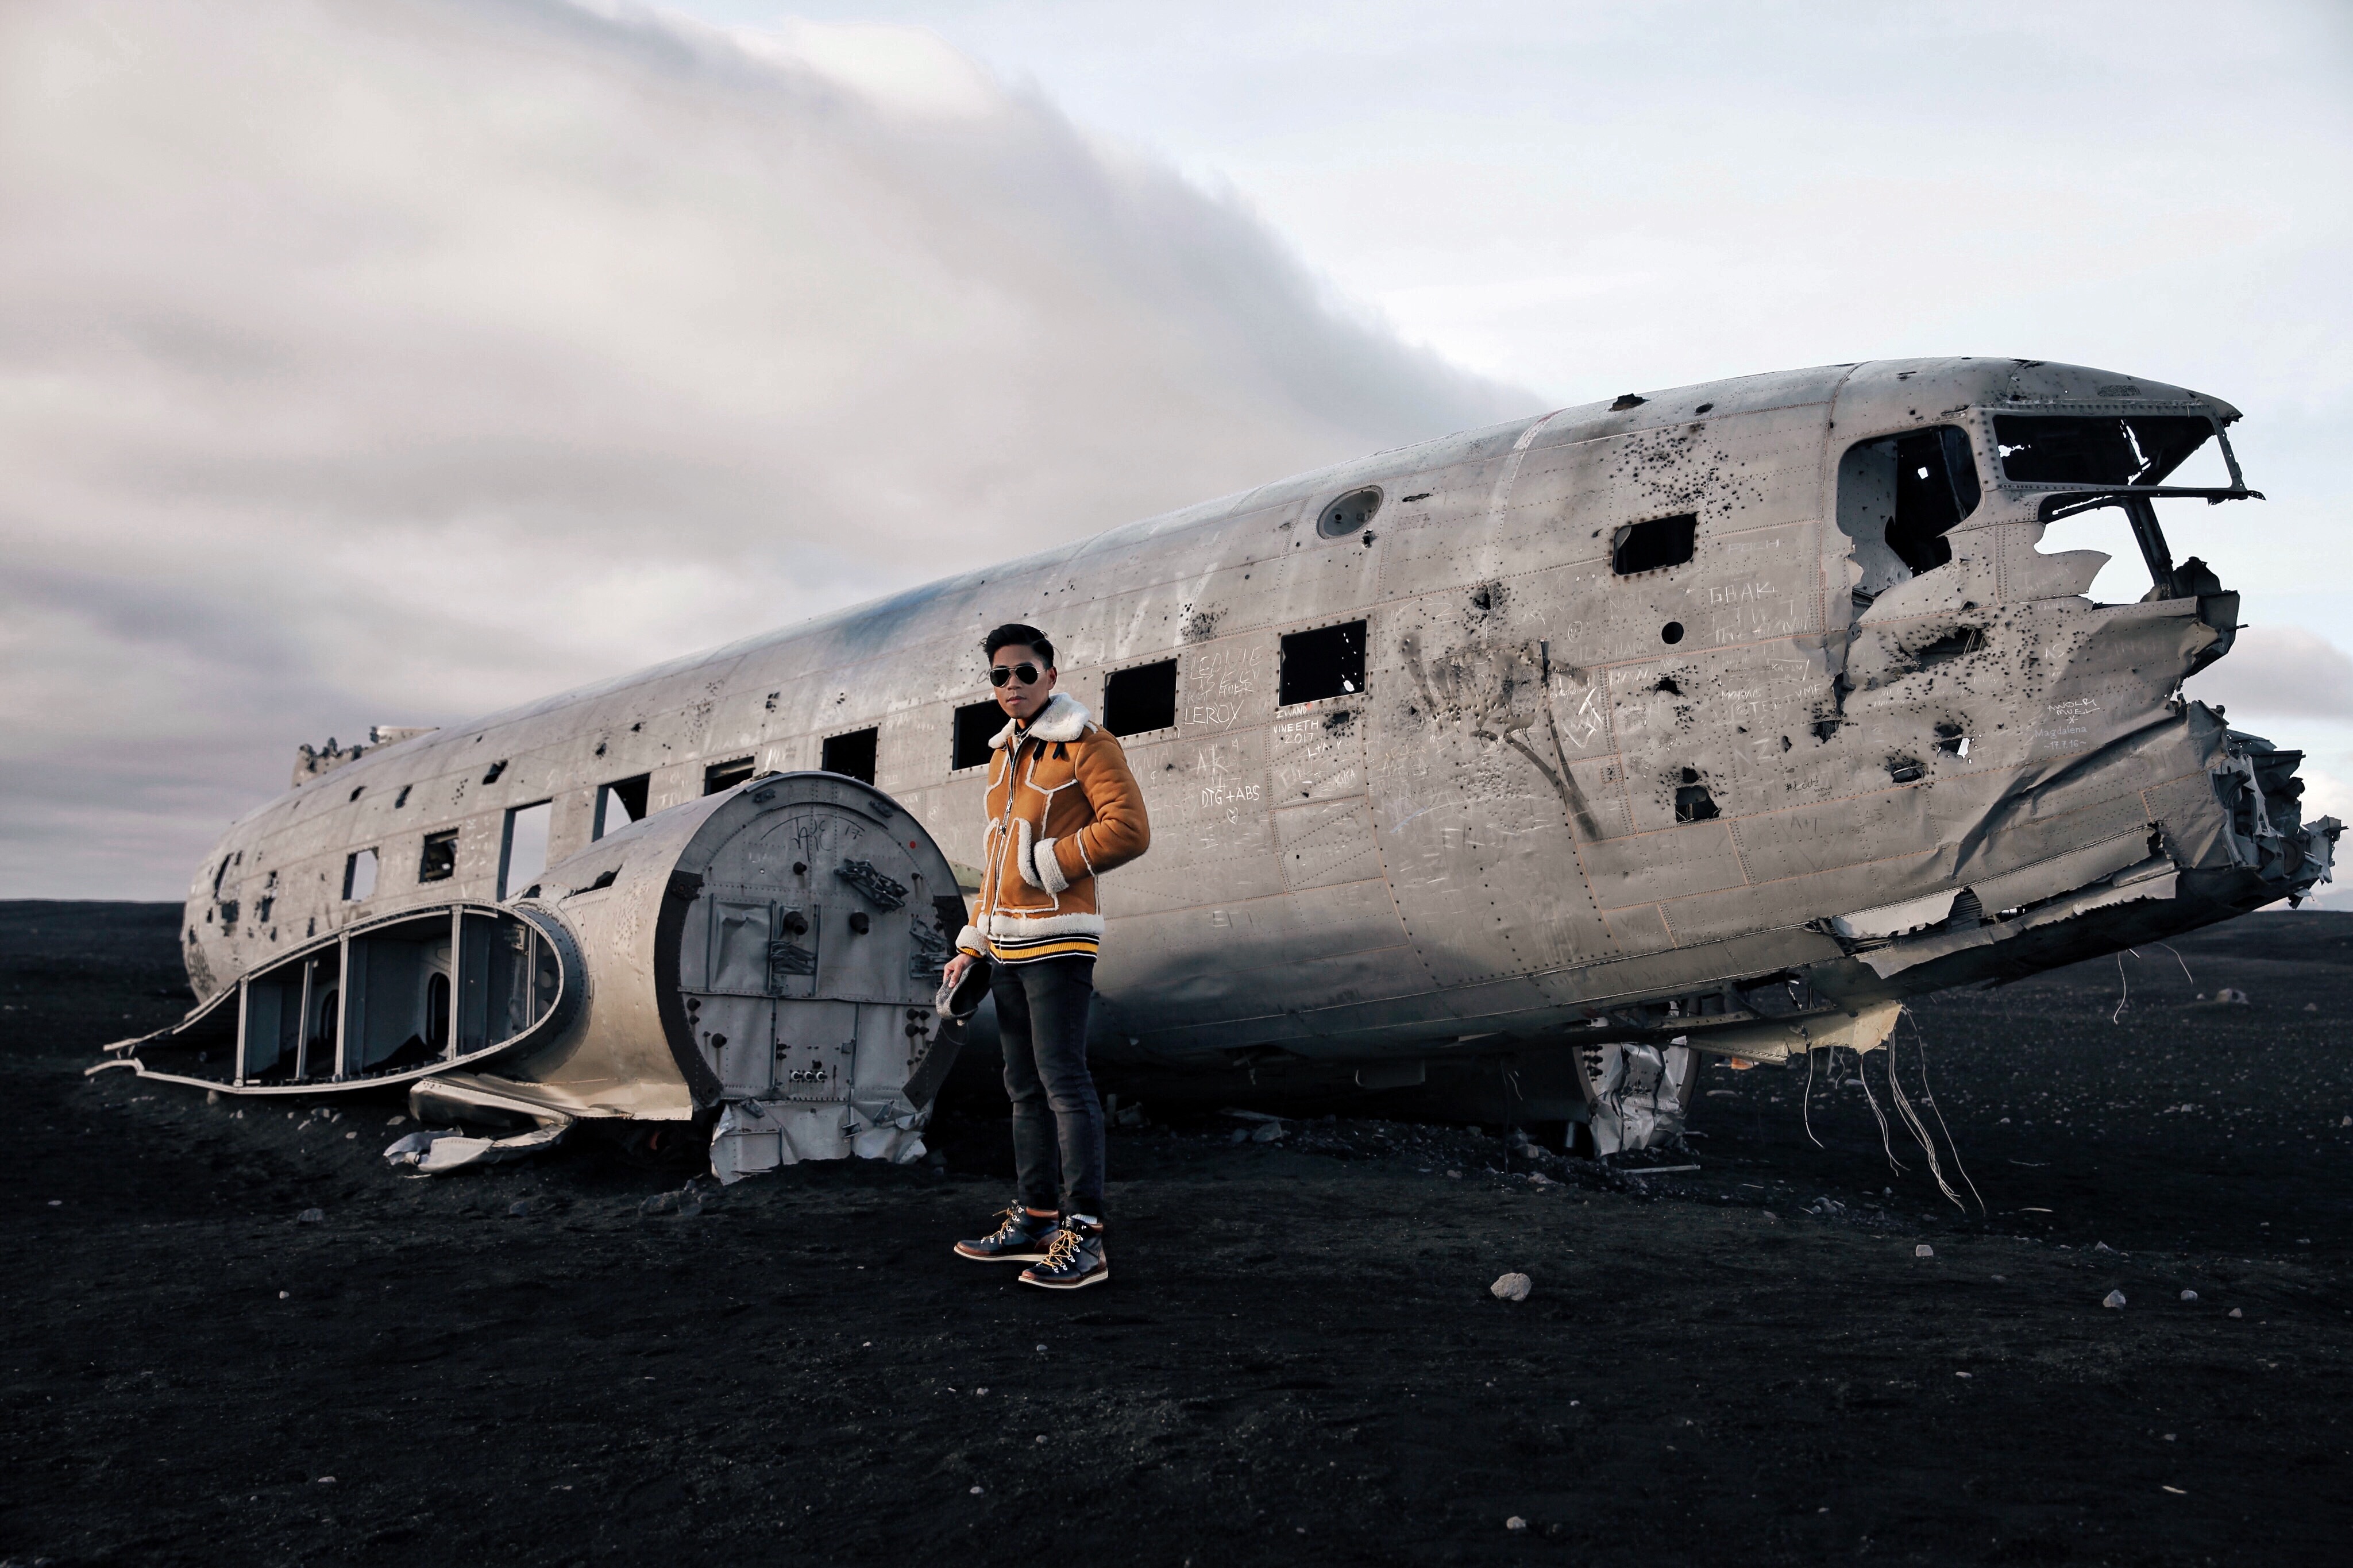 Iceland plane wreck site and photos best Instagram spots in Iceland